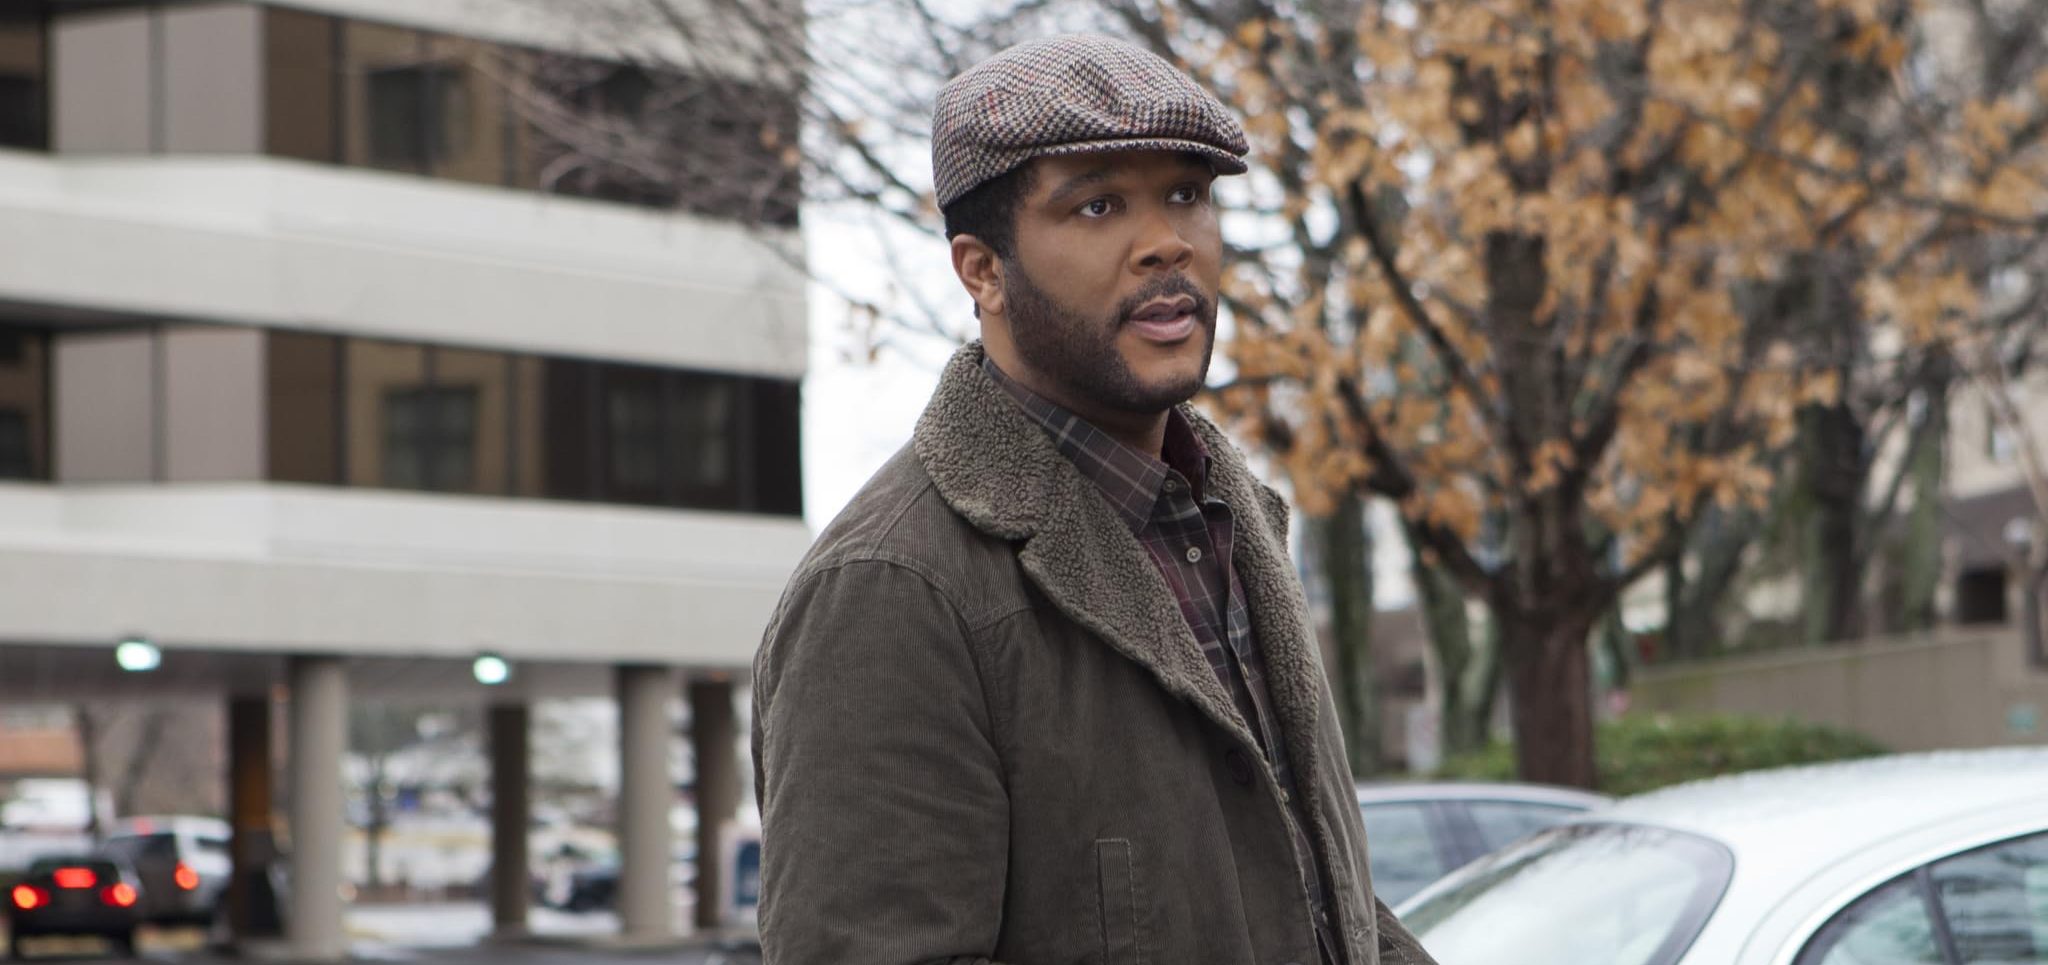 Tyler Perry’s Beauty in Black Starts Filming in Atlanta Next Month